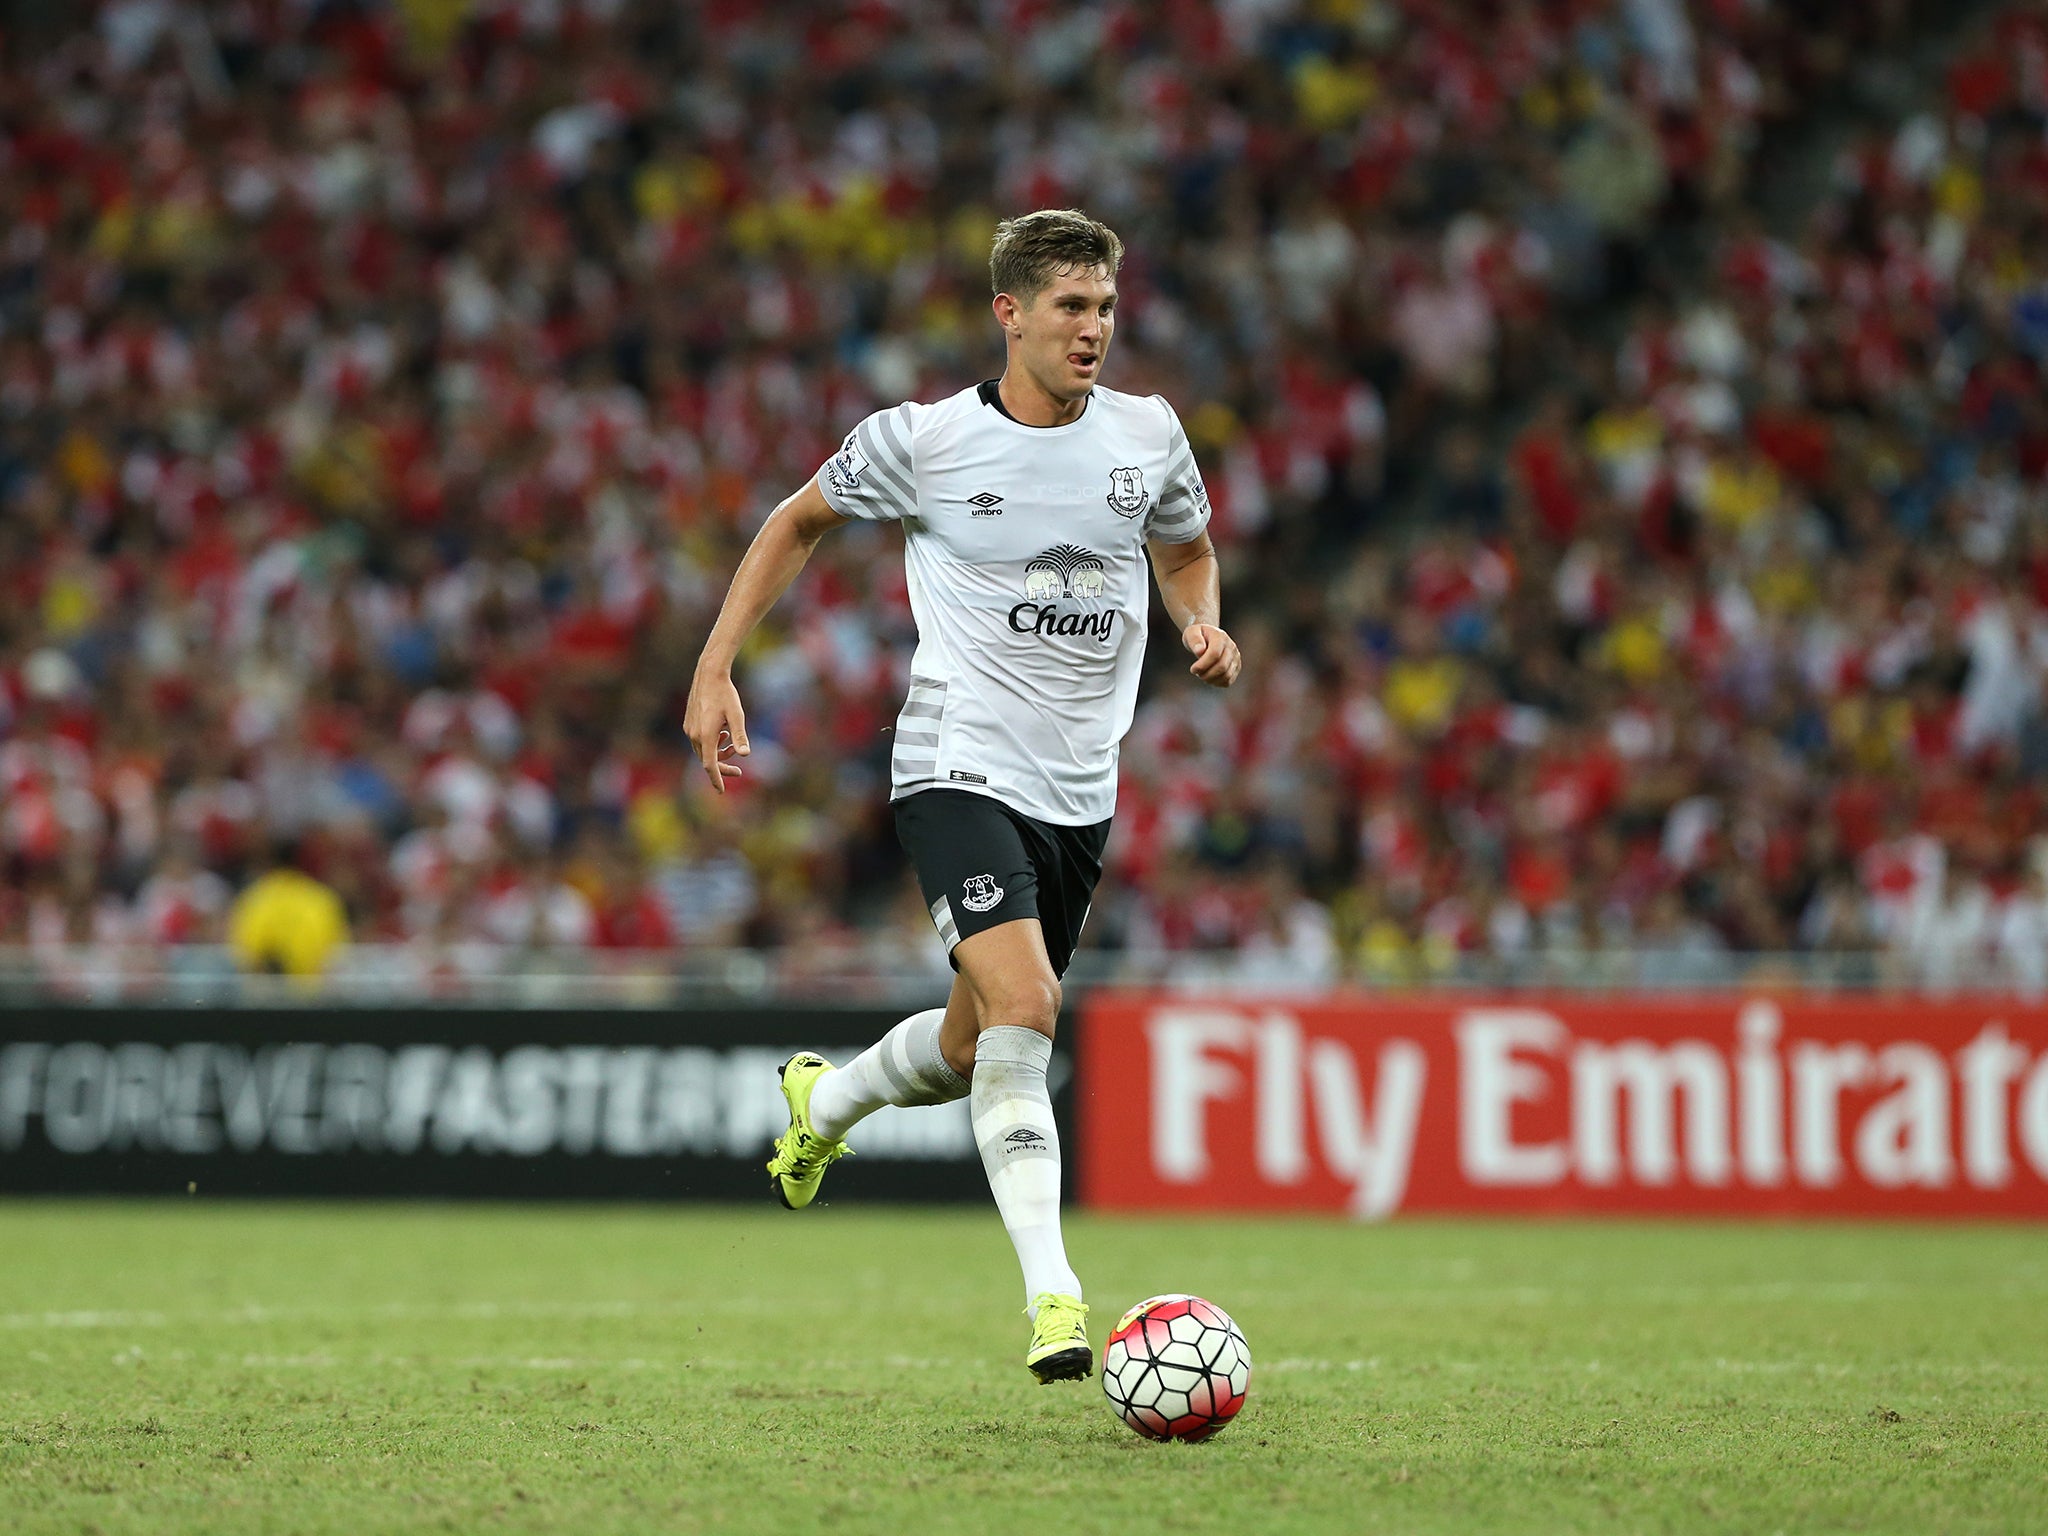 John Stones in action for Everton. The defender divides opinion